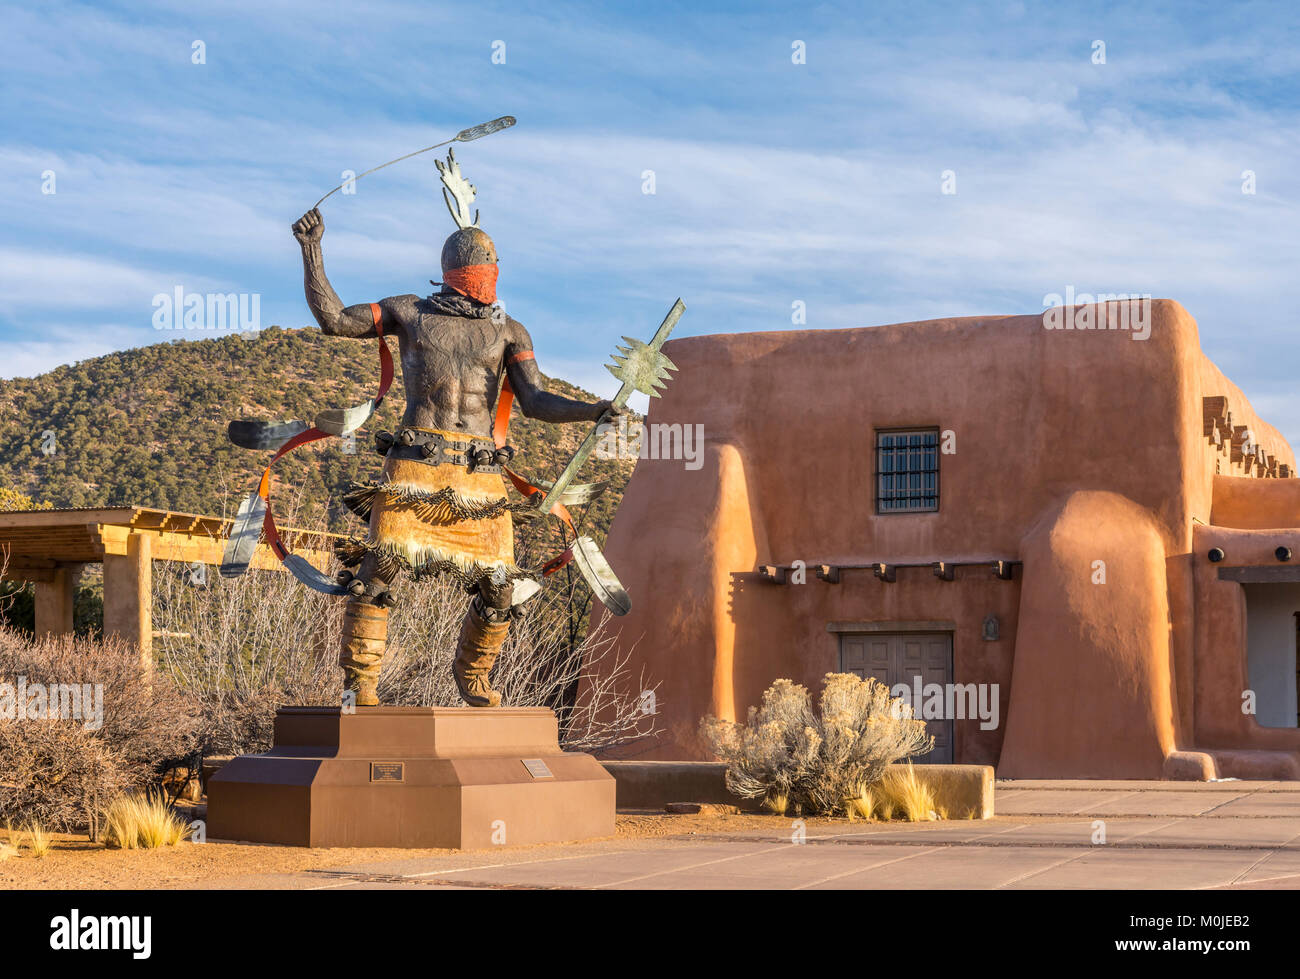 Museum of Indian Arts and Culture, Apache Mountain Spirit Dancer bronze sculpture by Goseyun and Anthropology Lab in Santa Fe, New Mexico USA. Stock Photo